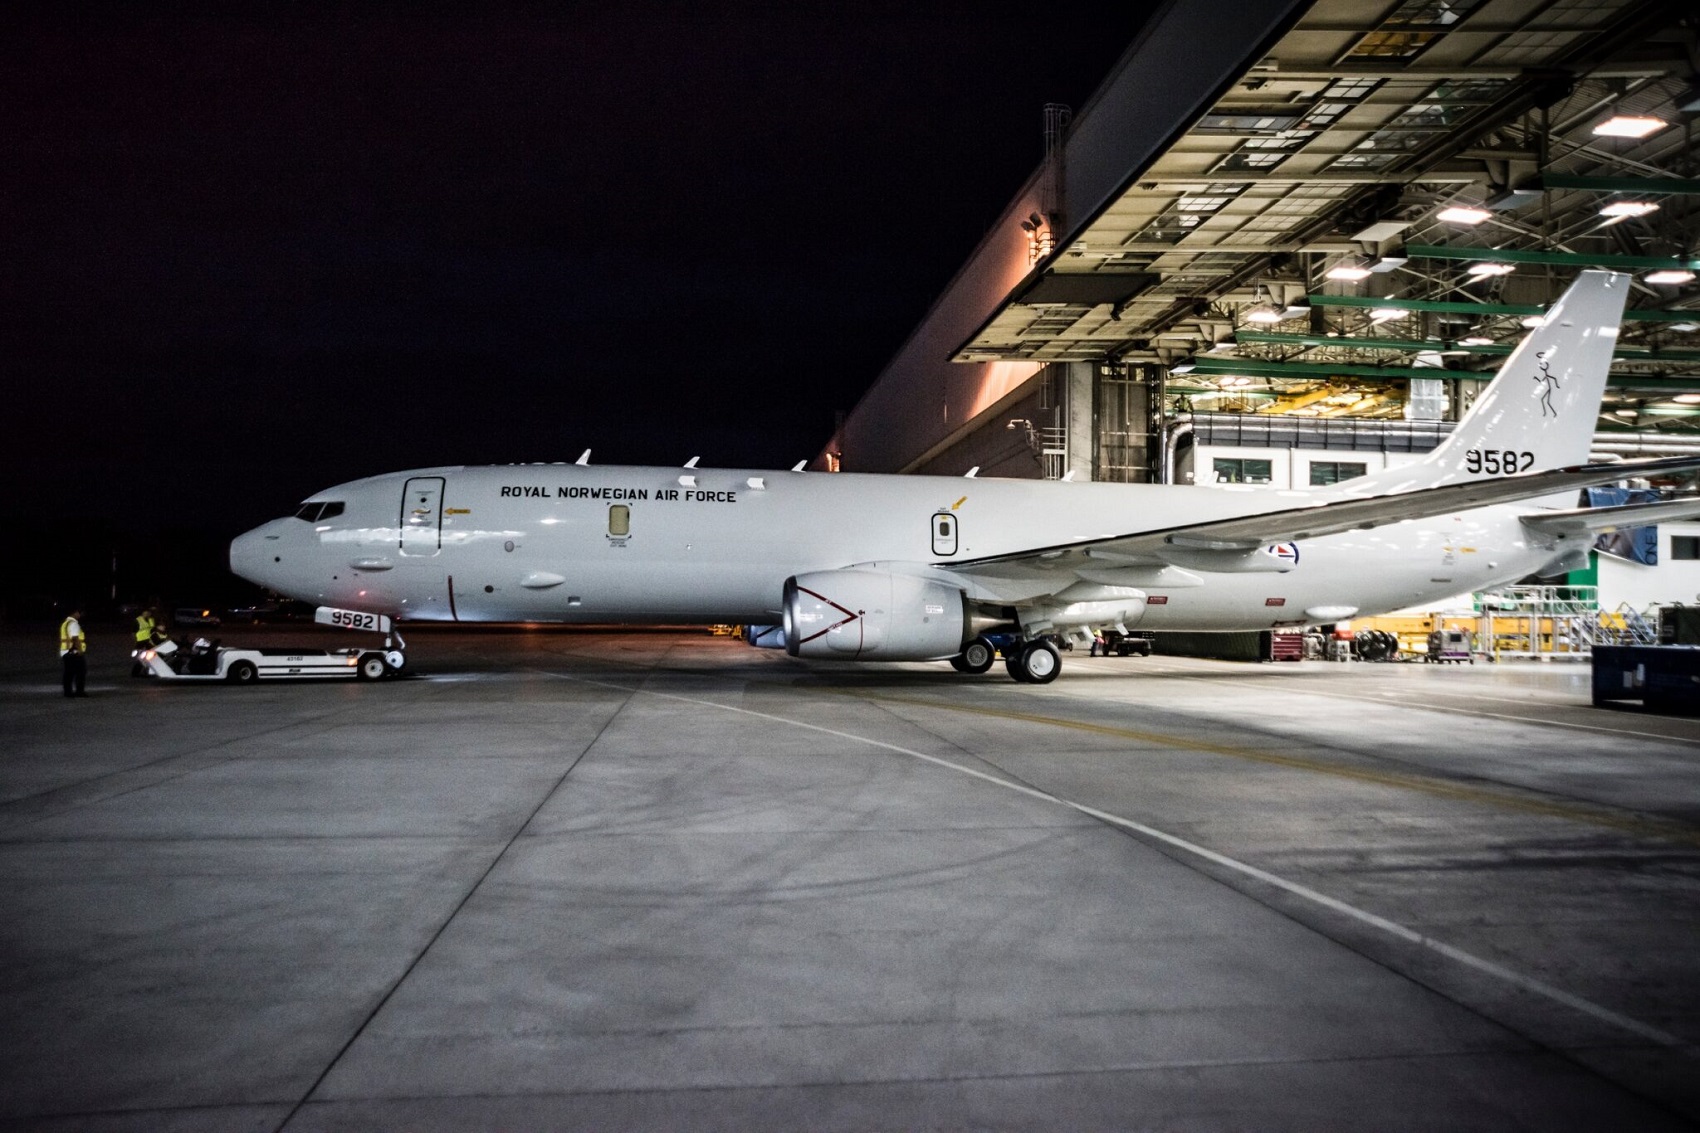 Norwegian Air Forceâ€™s First Boeing P-8A Poseidon Rolls Out of the Paint Shop